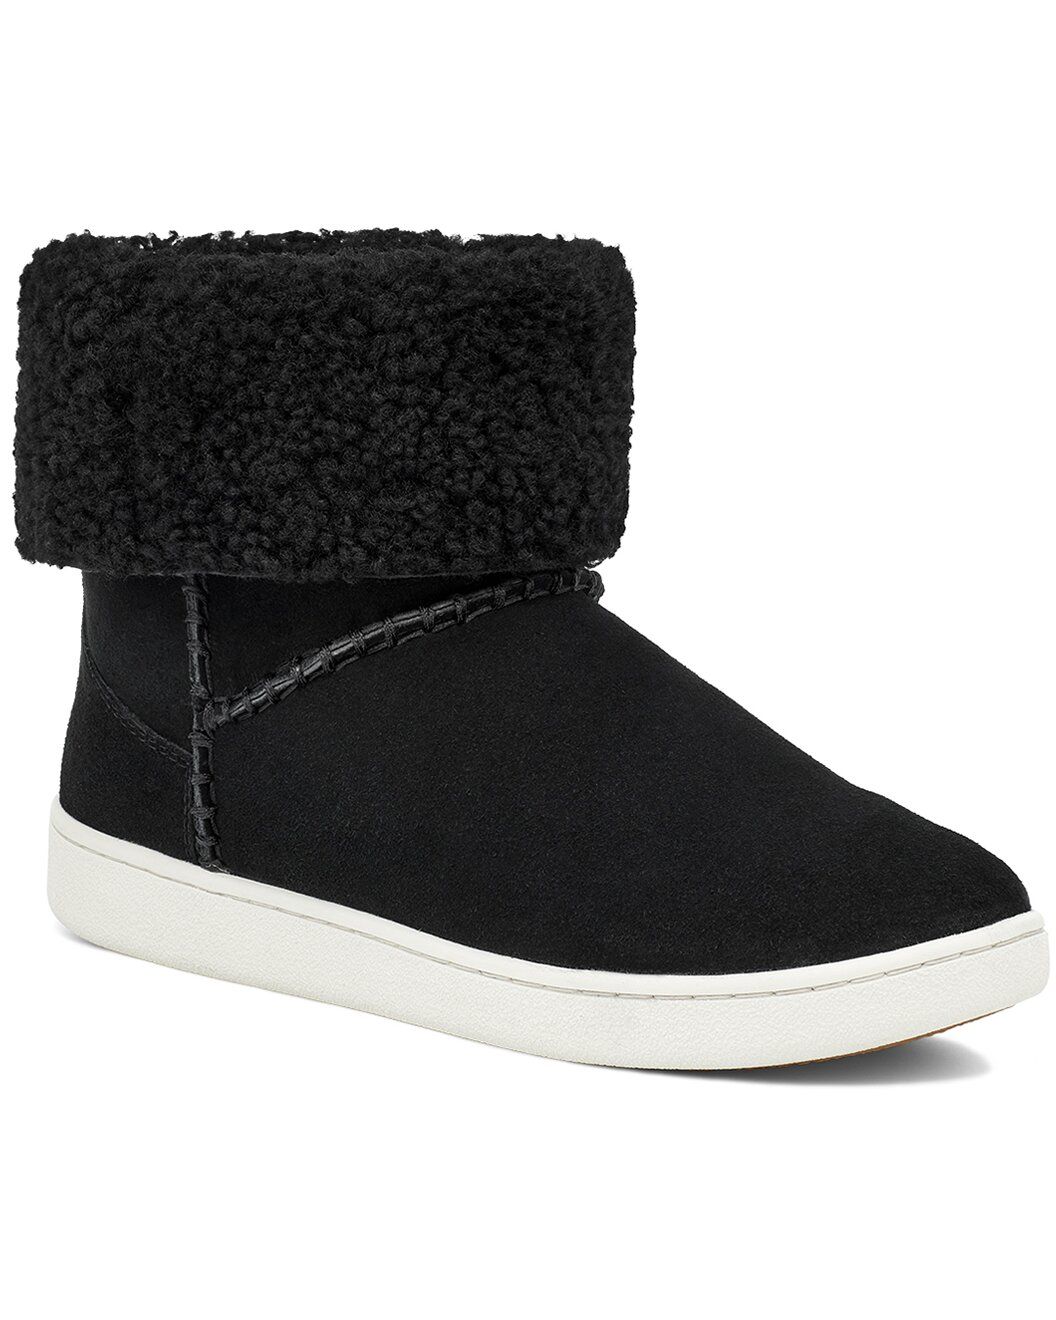 Mika Classic Suede Sneaker Boot | Ruelala